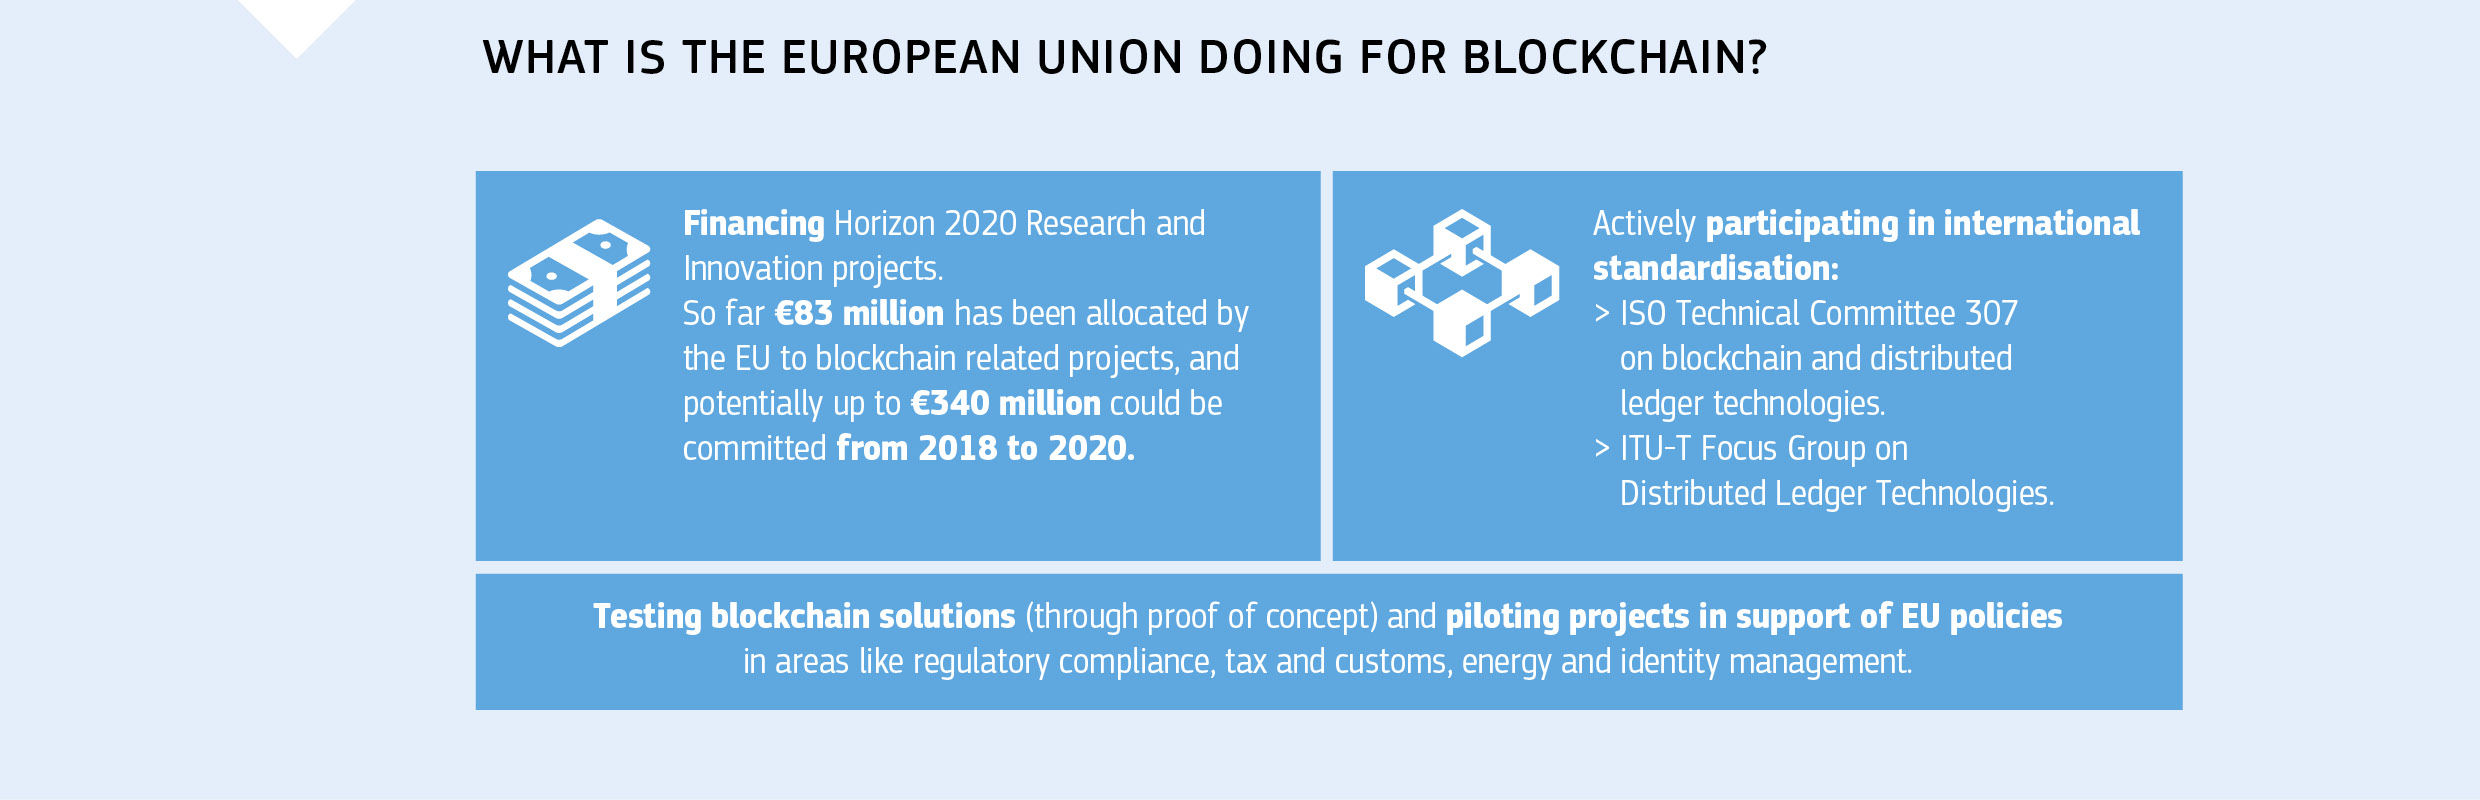 WHAT IS THE EUROPEAN UNION DOING FOR BLOCKCHAIN?